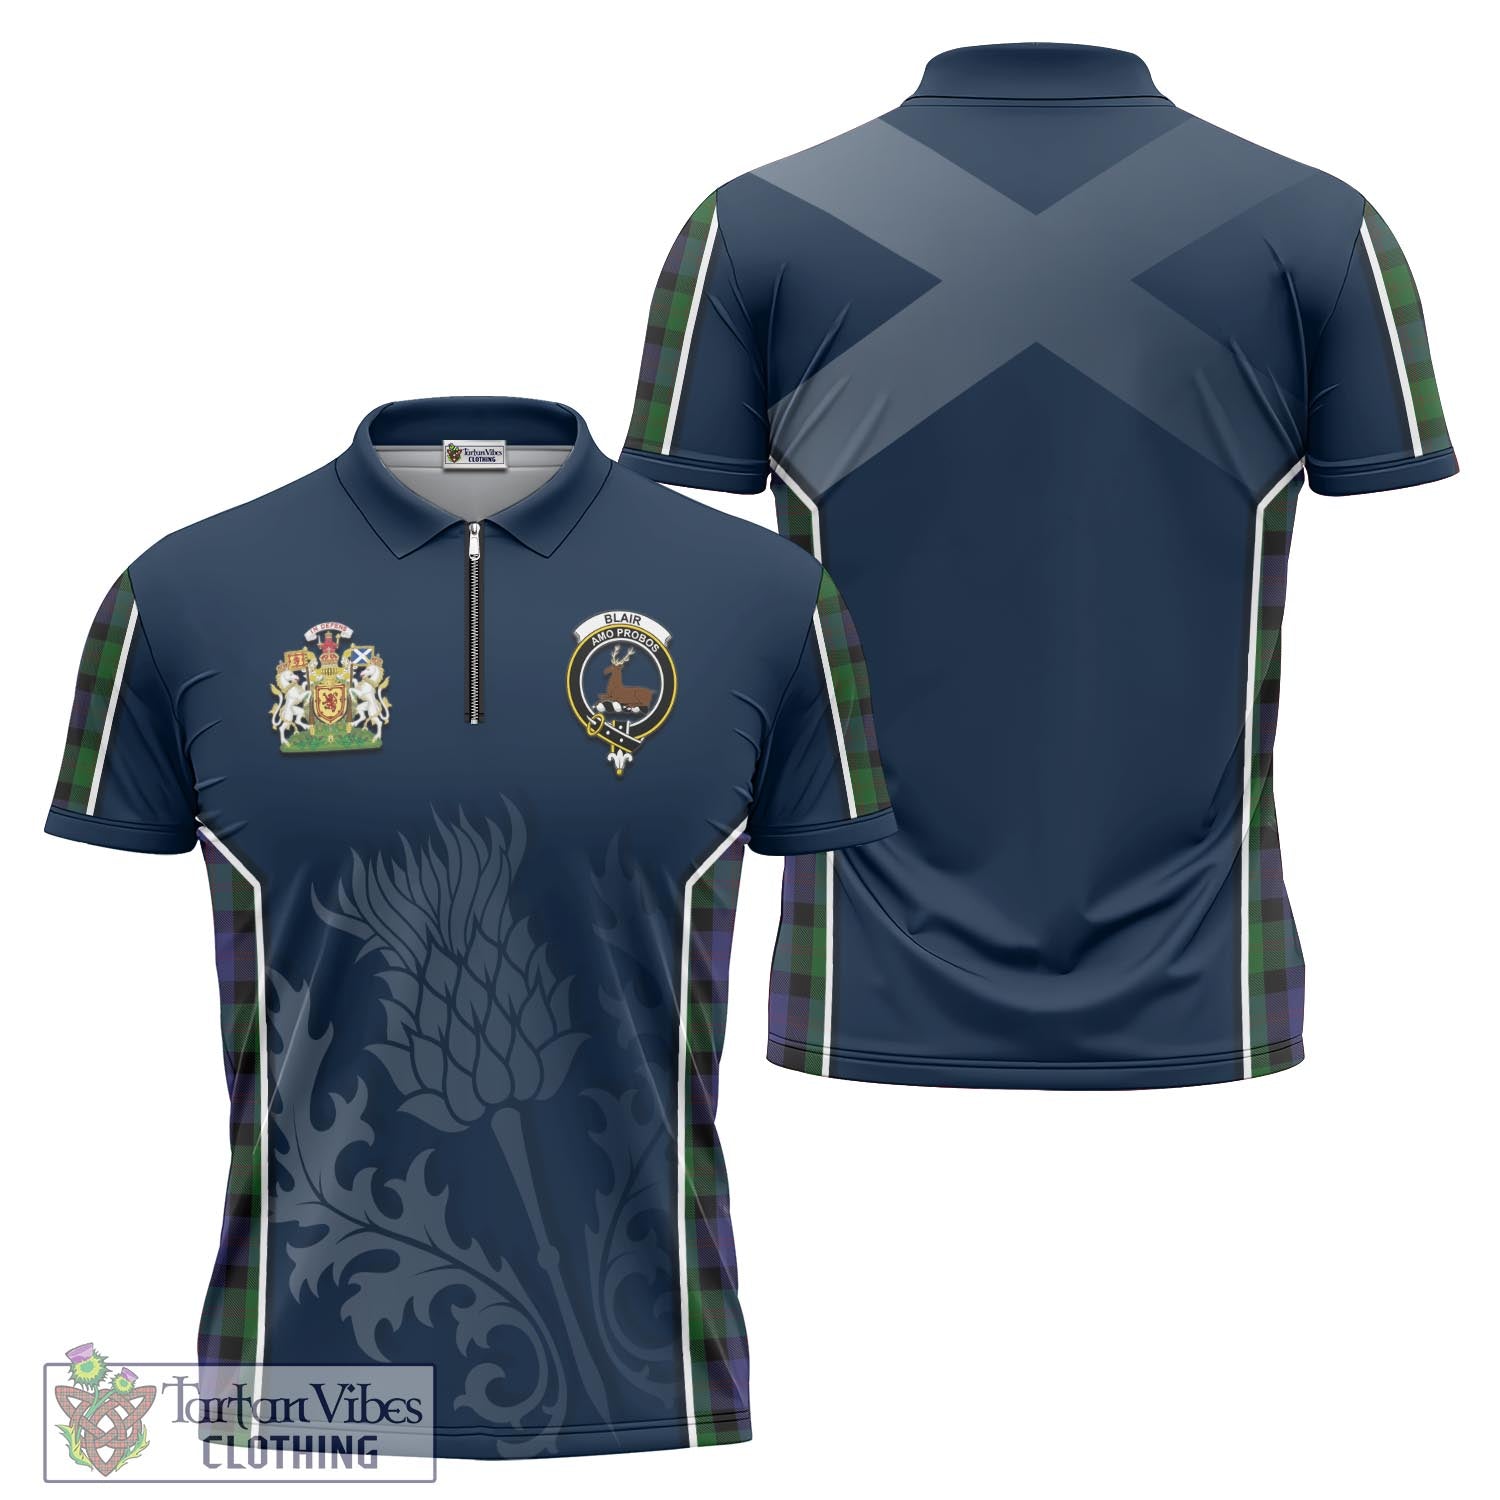 Tartan Vibes Clothing Blair Tartan Zipper Polo Shirt with Family Crest and Scottish Thistle Vibes Sport Style